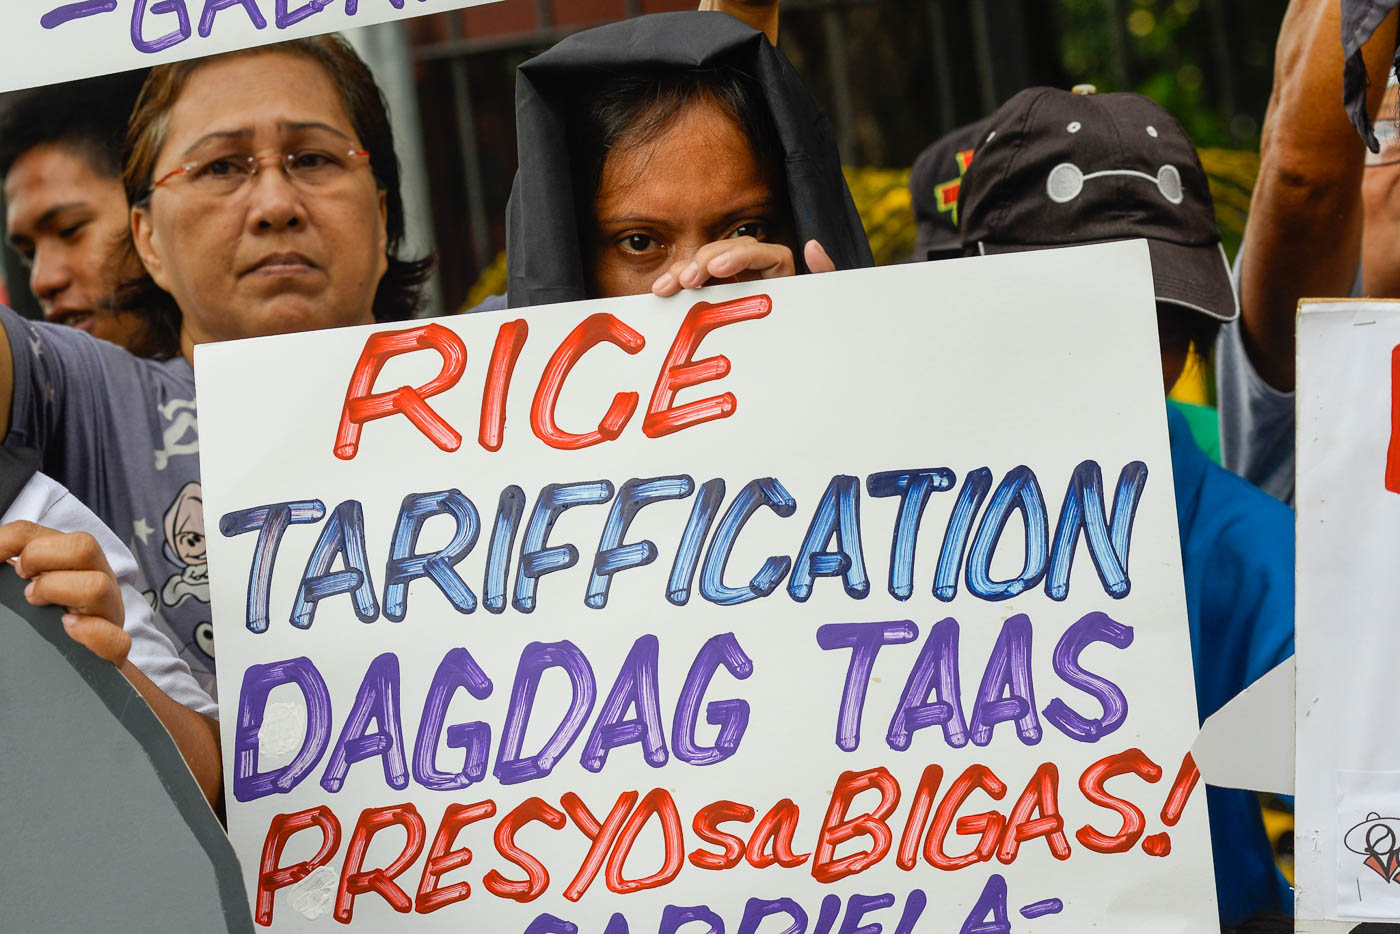 essay about rice inflation in the philippines